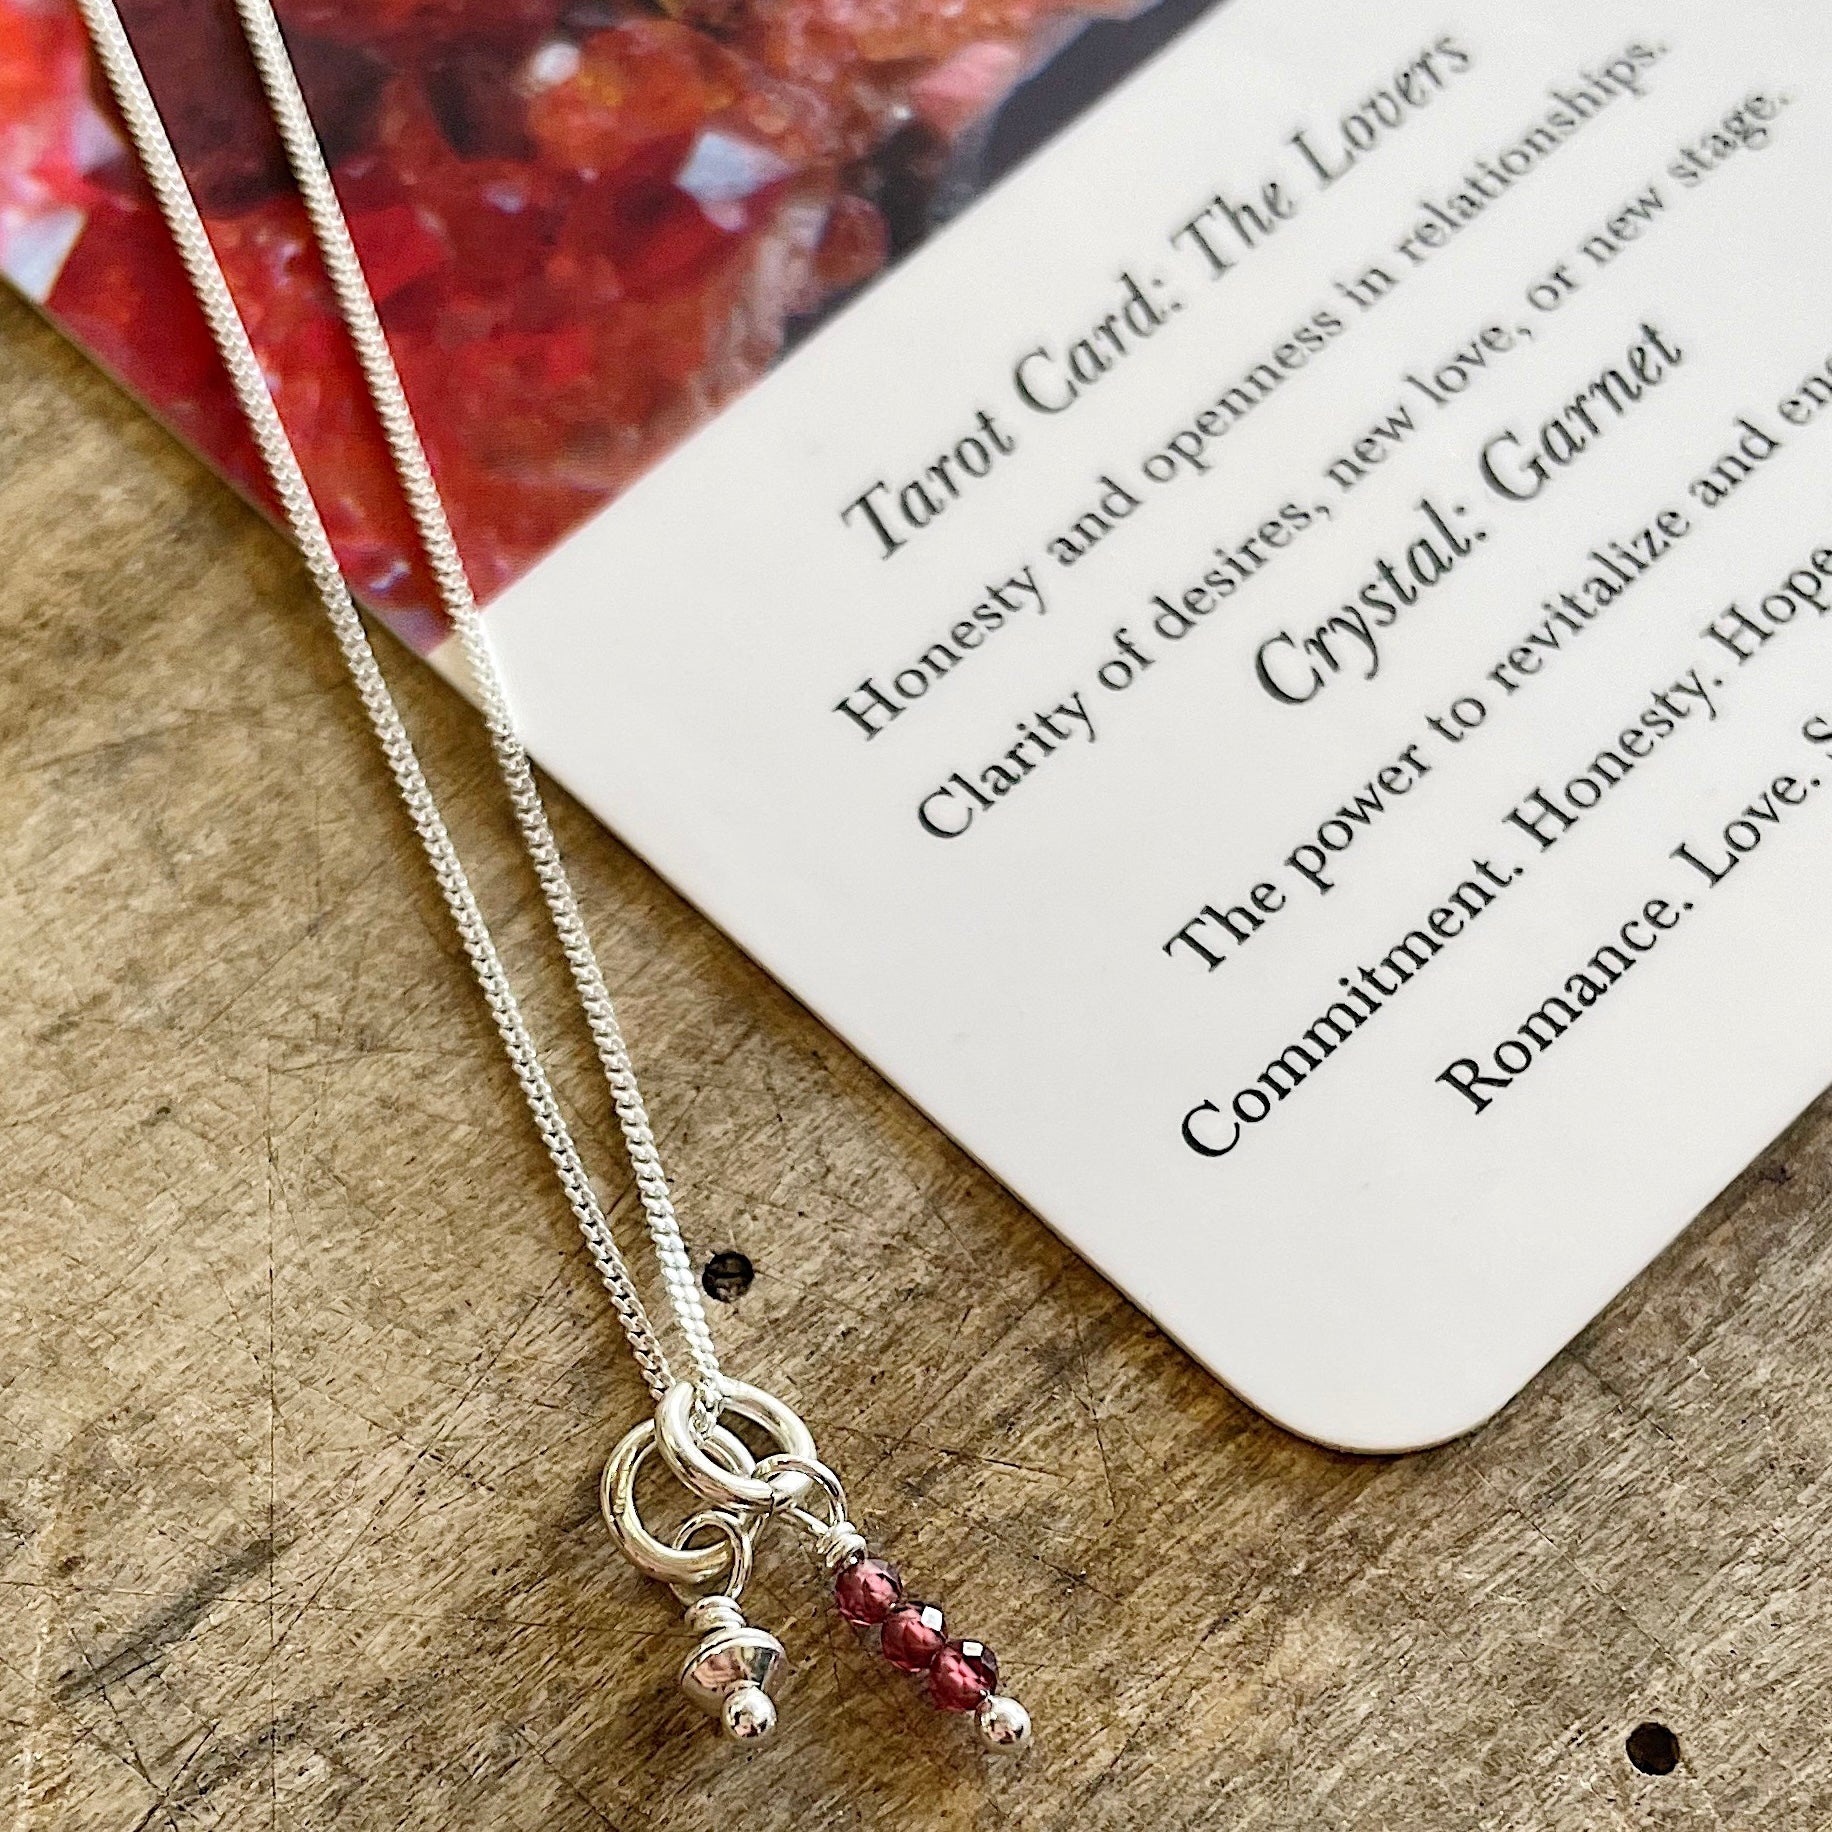 Three Of Cups // Tarot Necklace VI The Lovers Garnet and Sterling Silv –  Coal Miner's Daughter